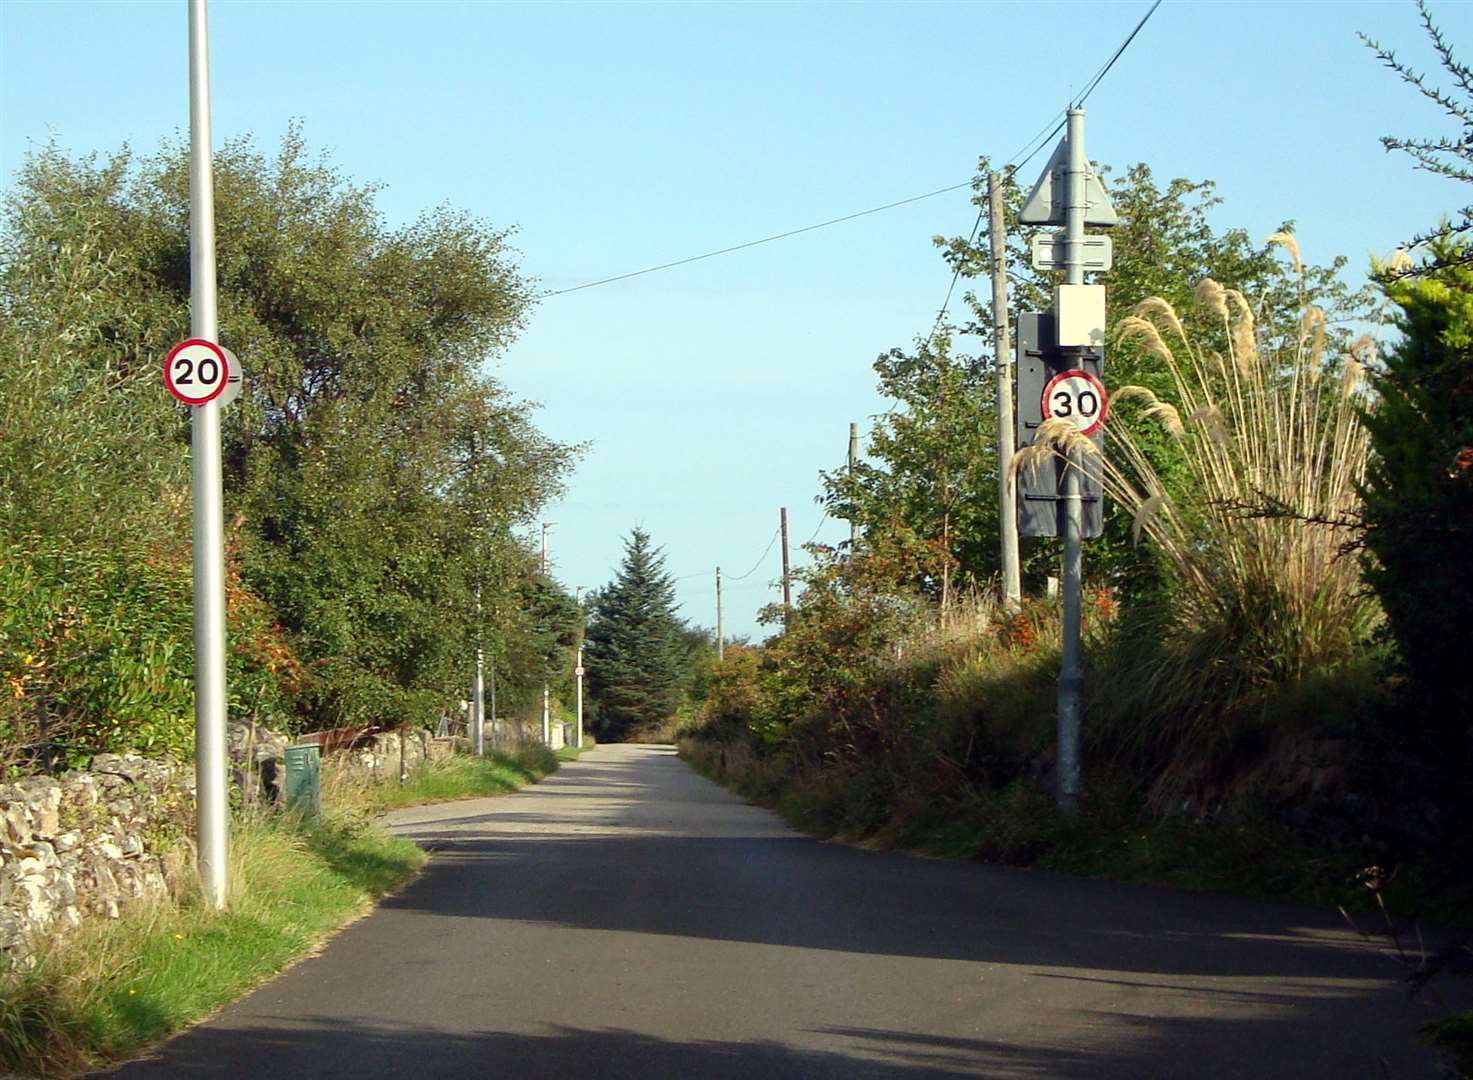 The signs on this road are leading to confusion over the speed limit.